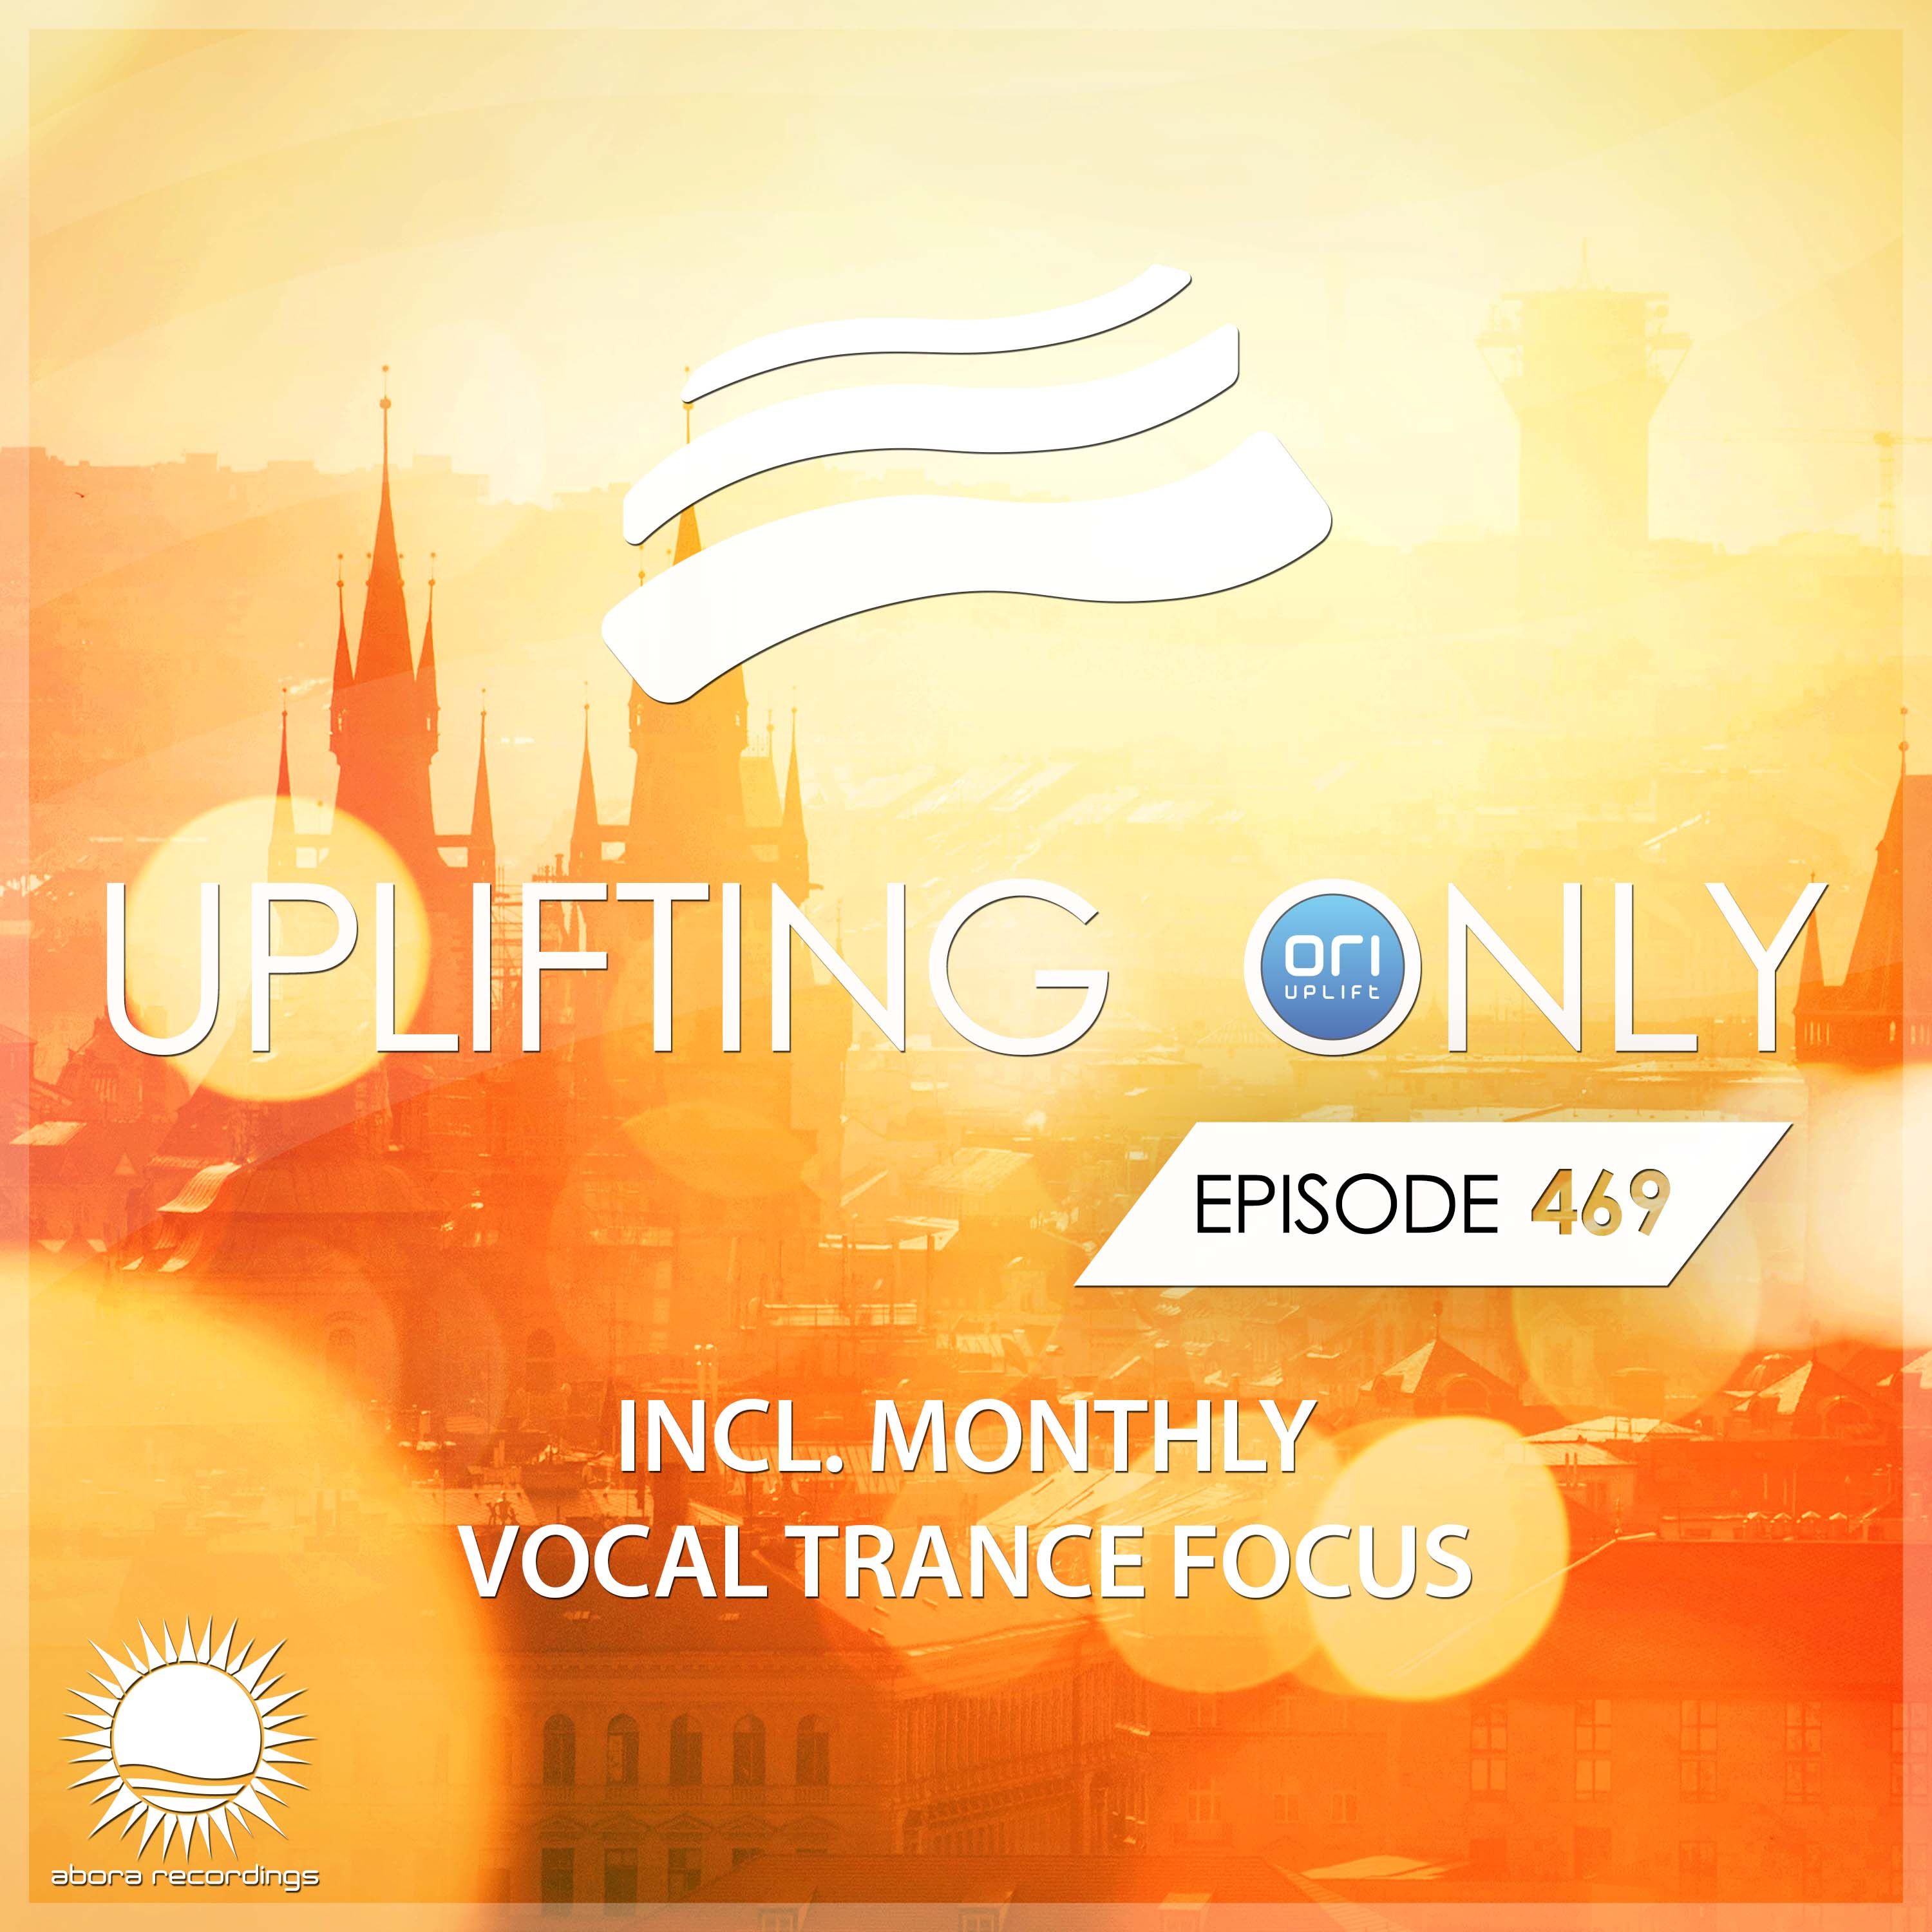 Uplifting Only 469 (Feb 3, 2021) [Vocal Trance Focus]